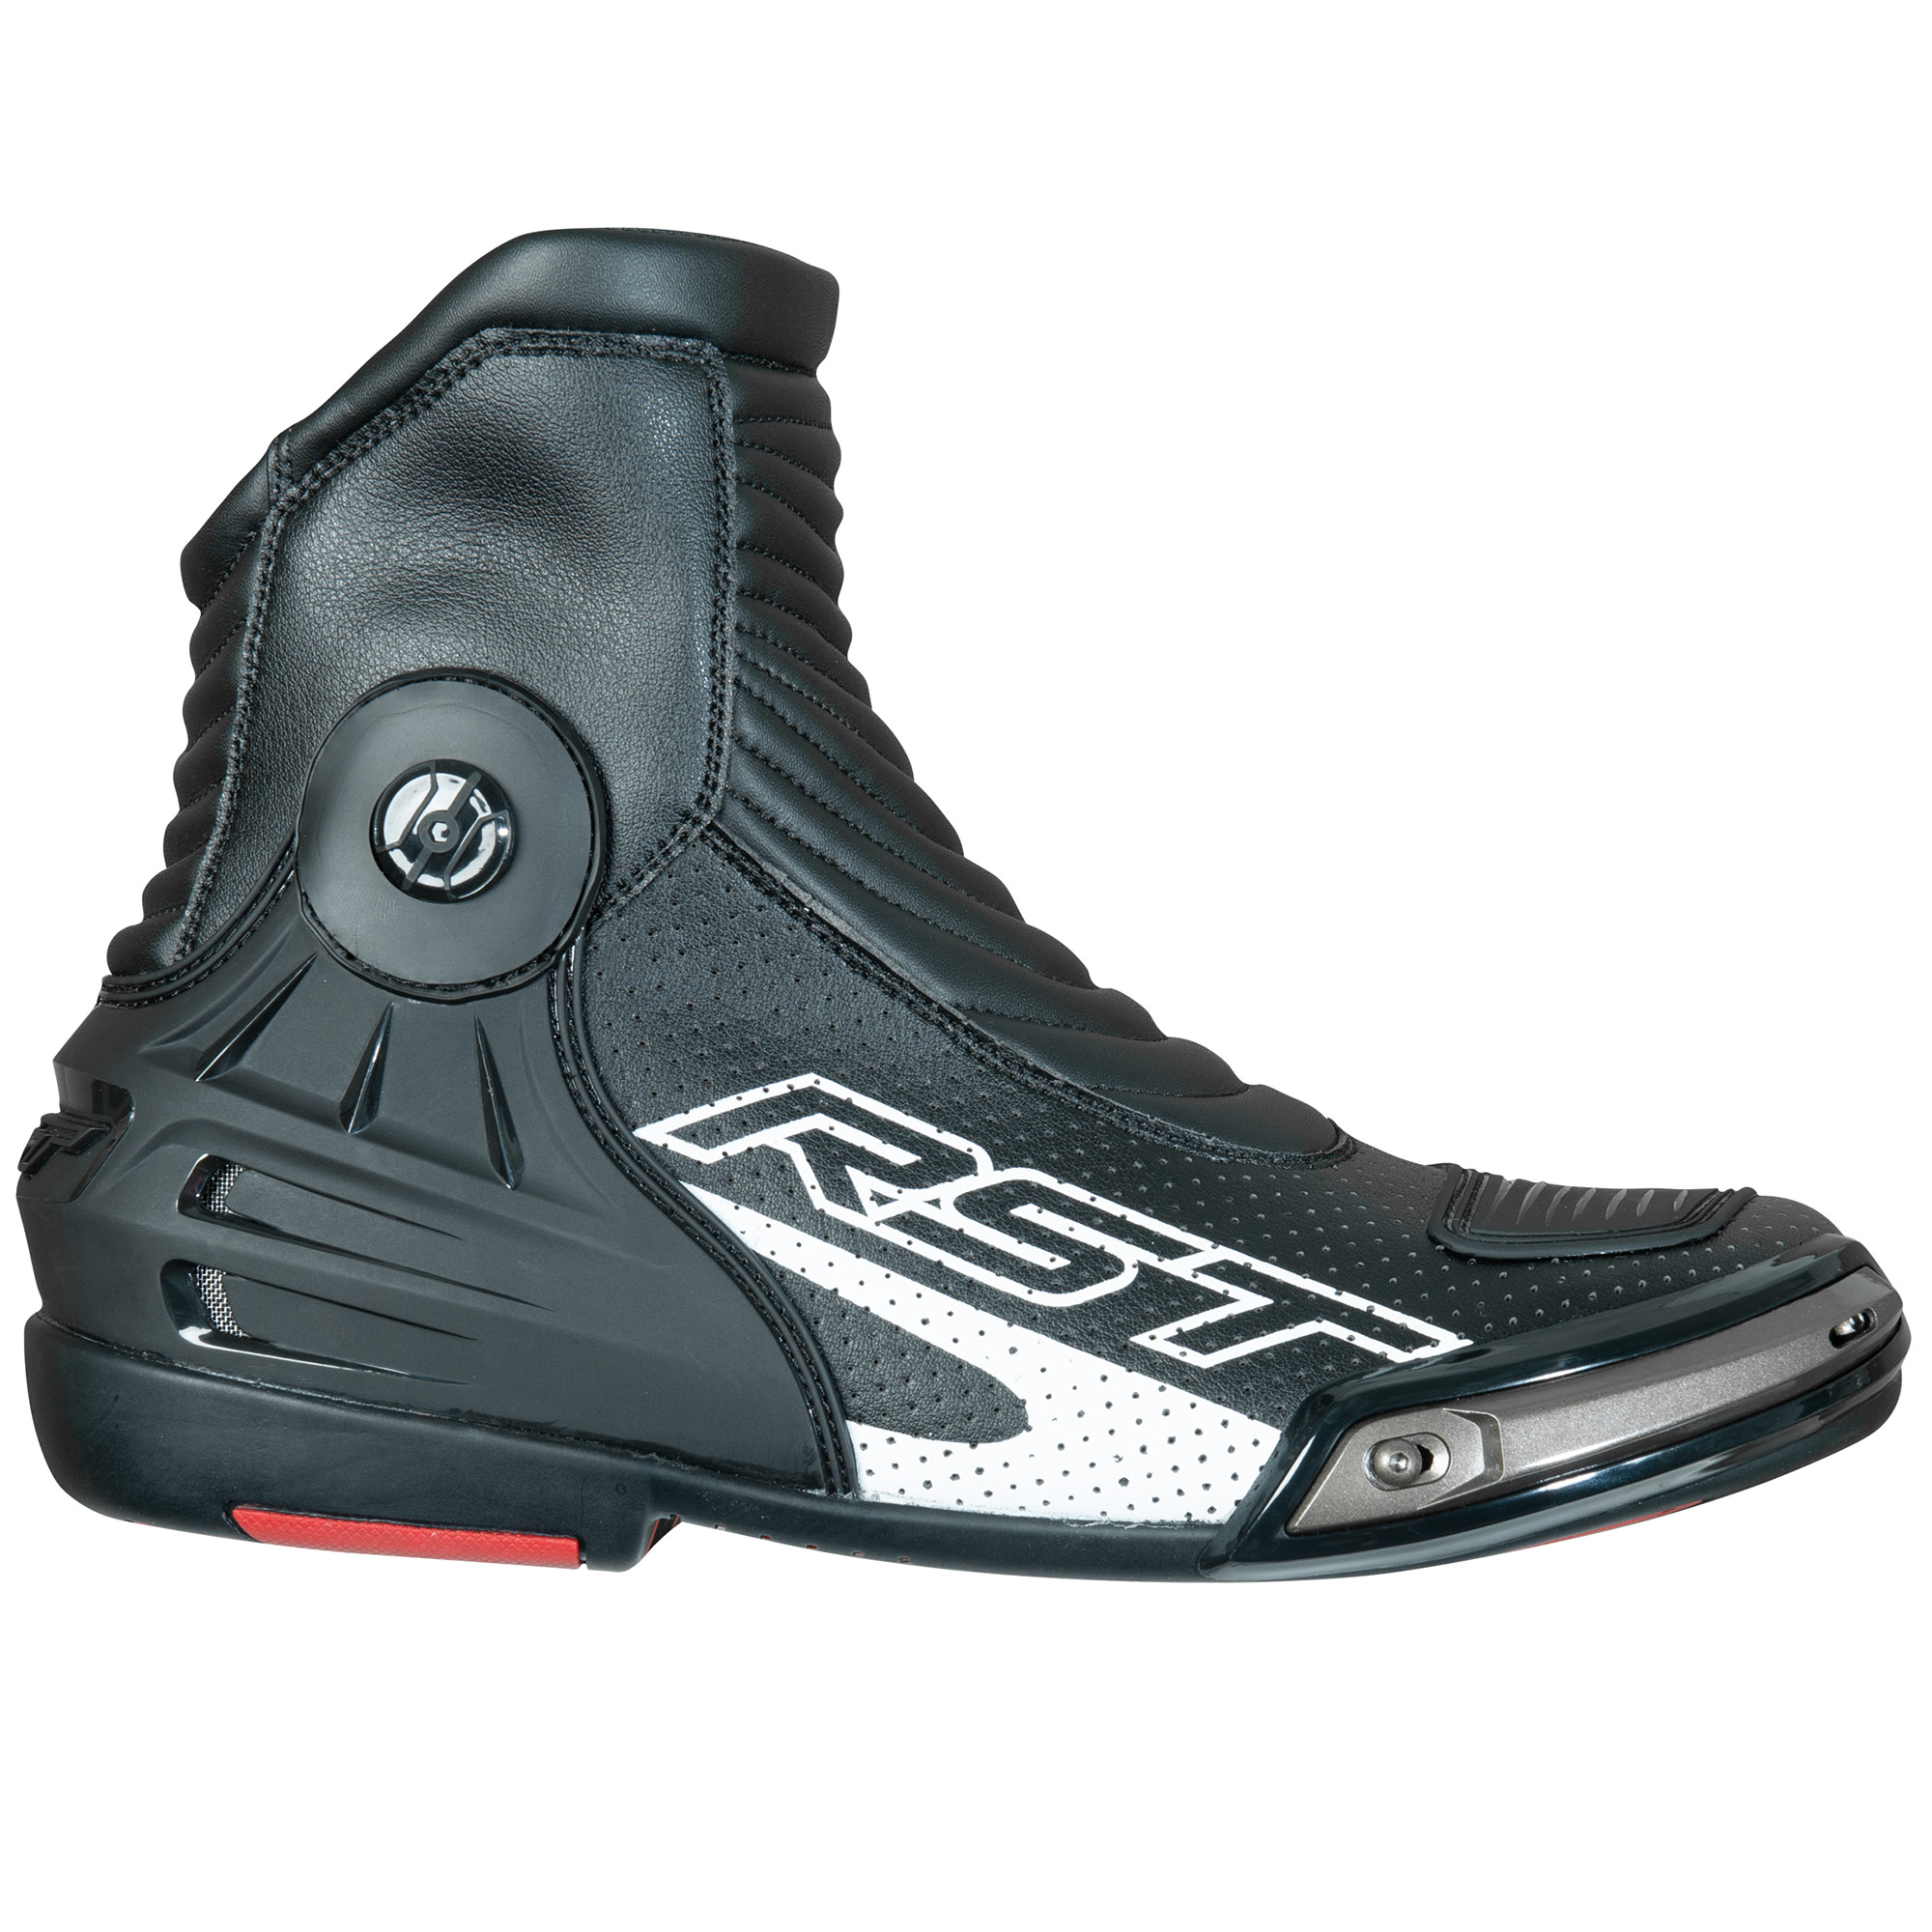 RST Tractech Evo 3 Short CE Motorcycle Motorbike Leather Boots White 